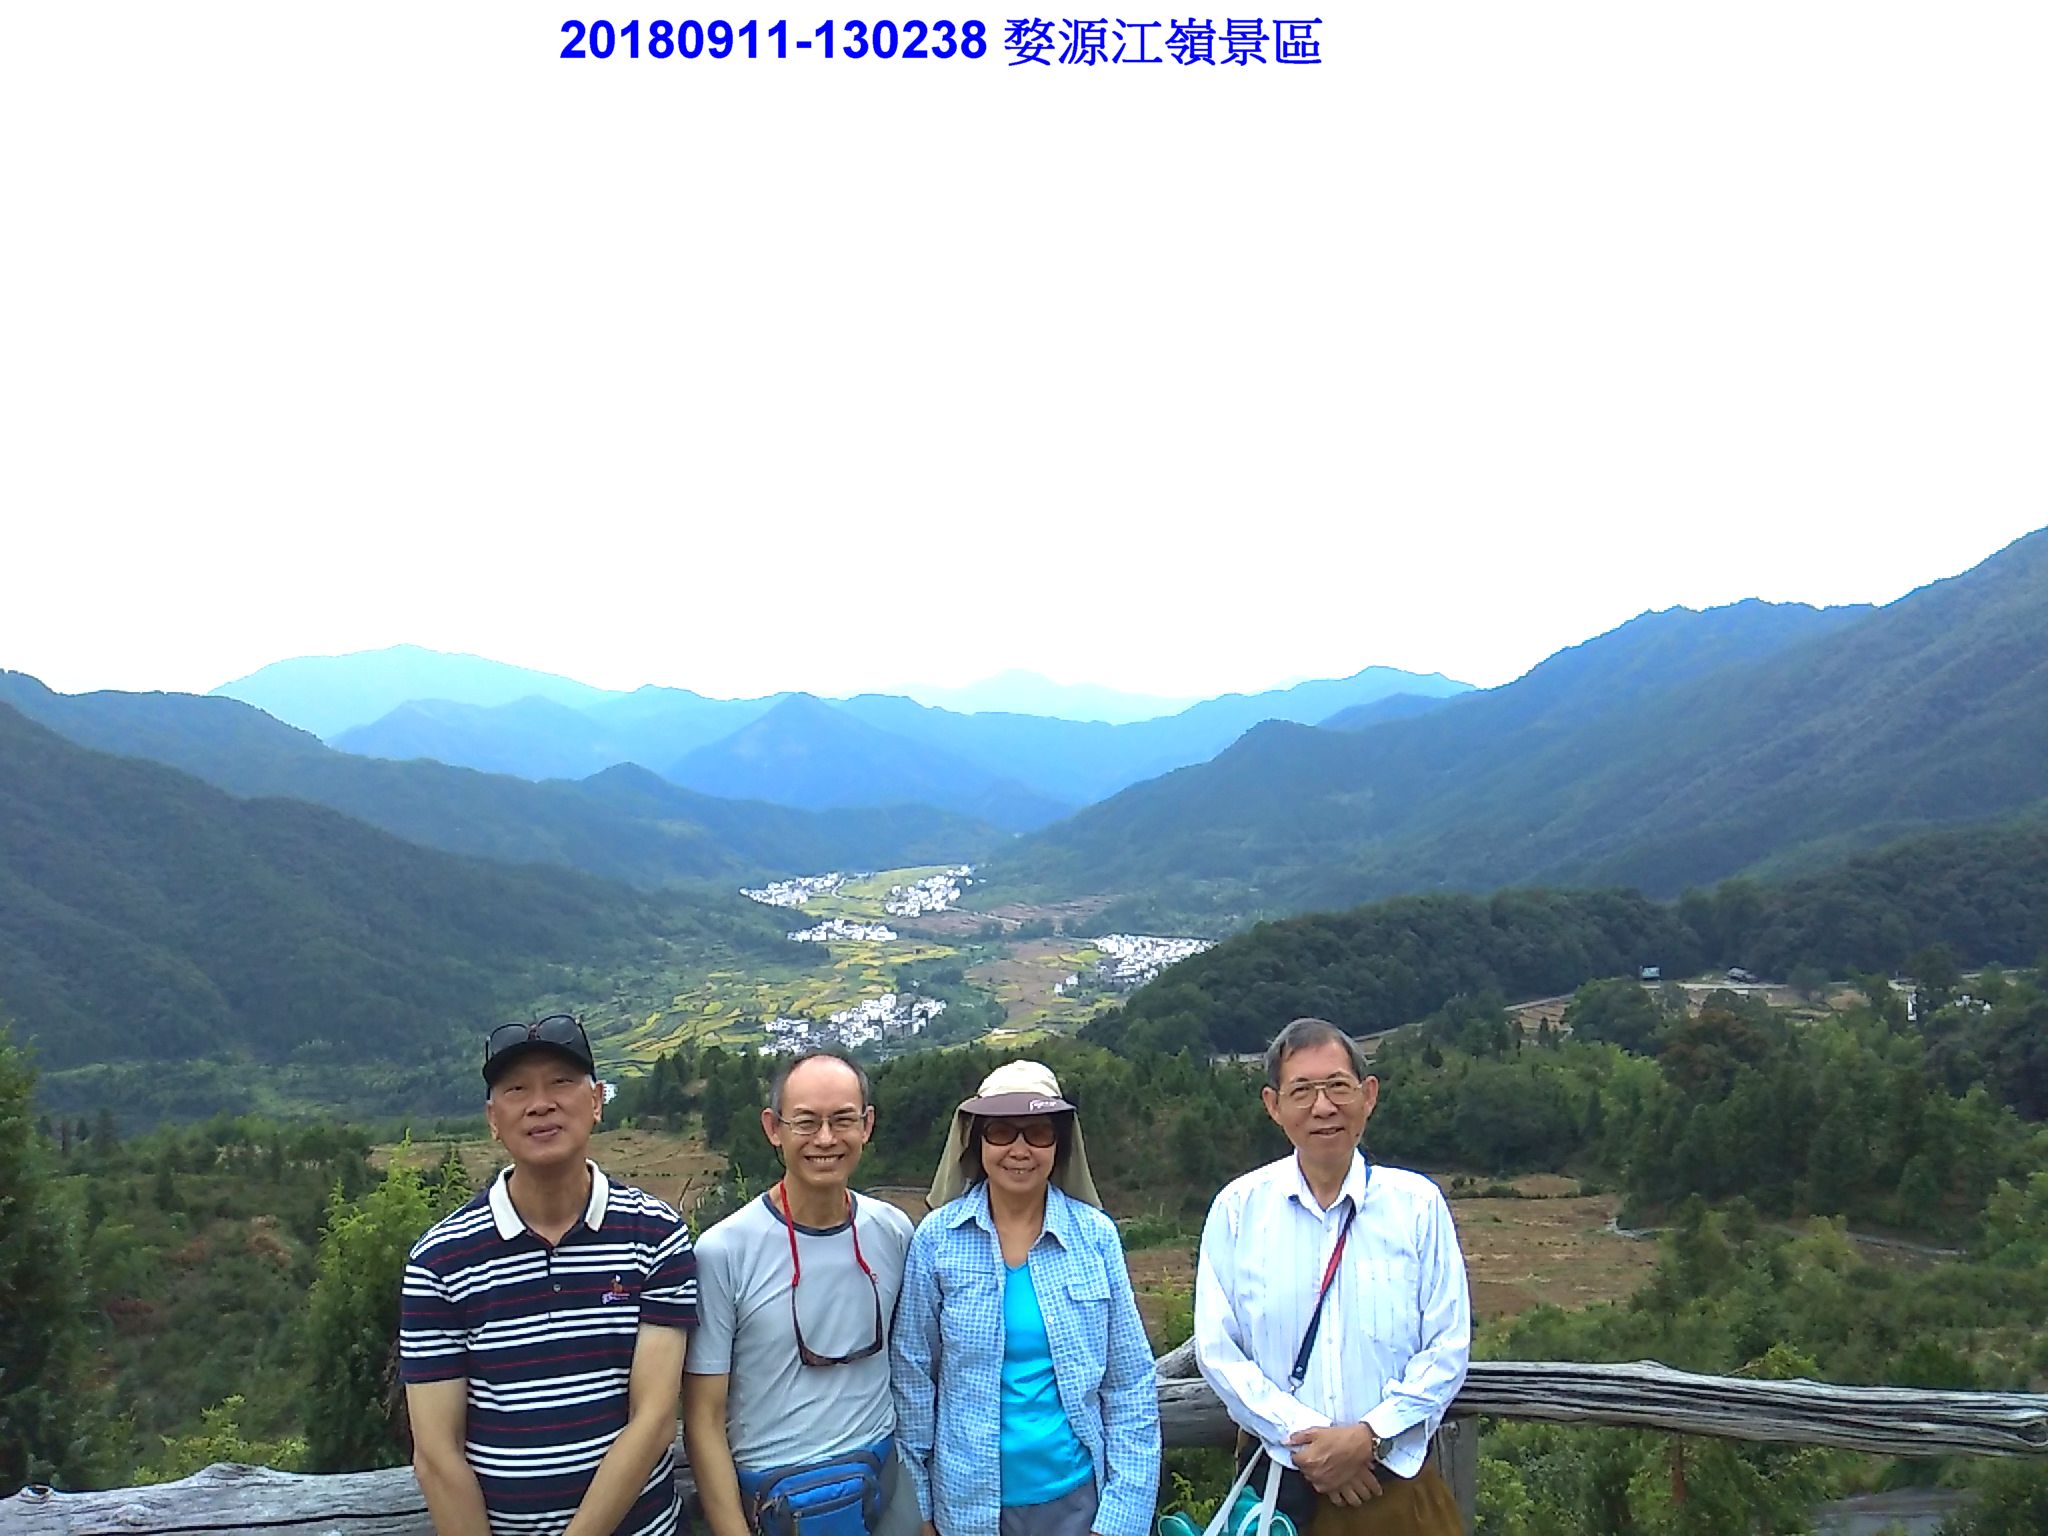 Class of 1973 - trip in mainland China